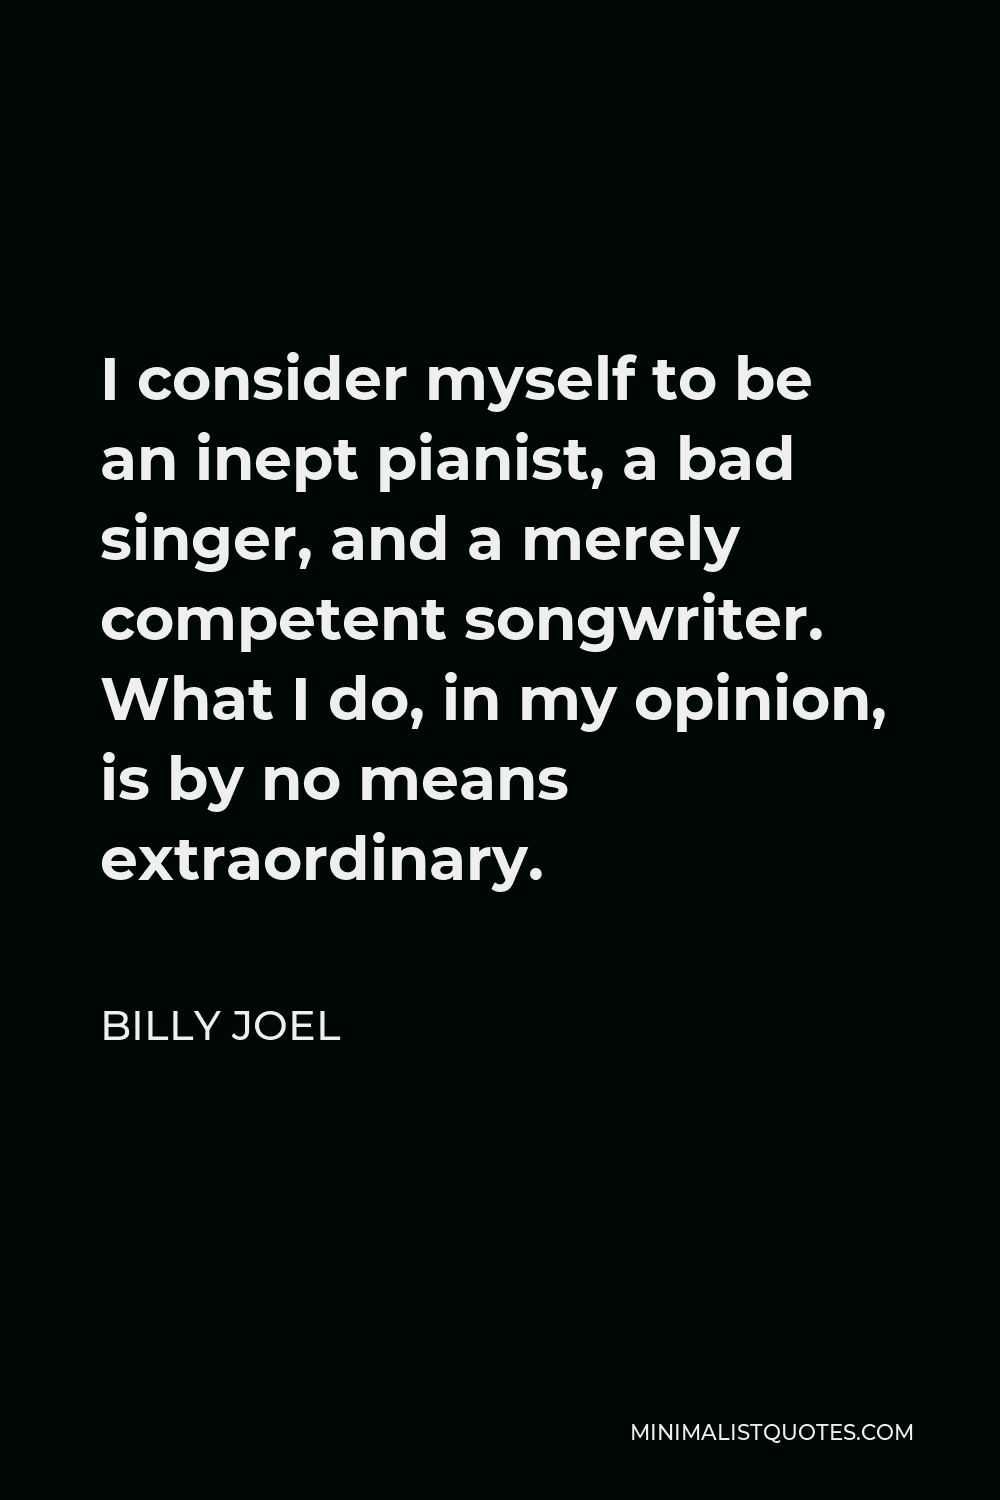 Billy Joel Quote - I consider myself to be an inept pianist, a bad singer, and a merely competent songwriter. …